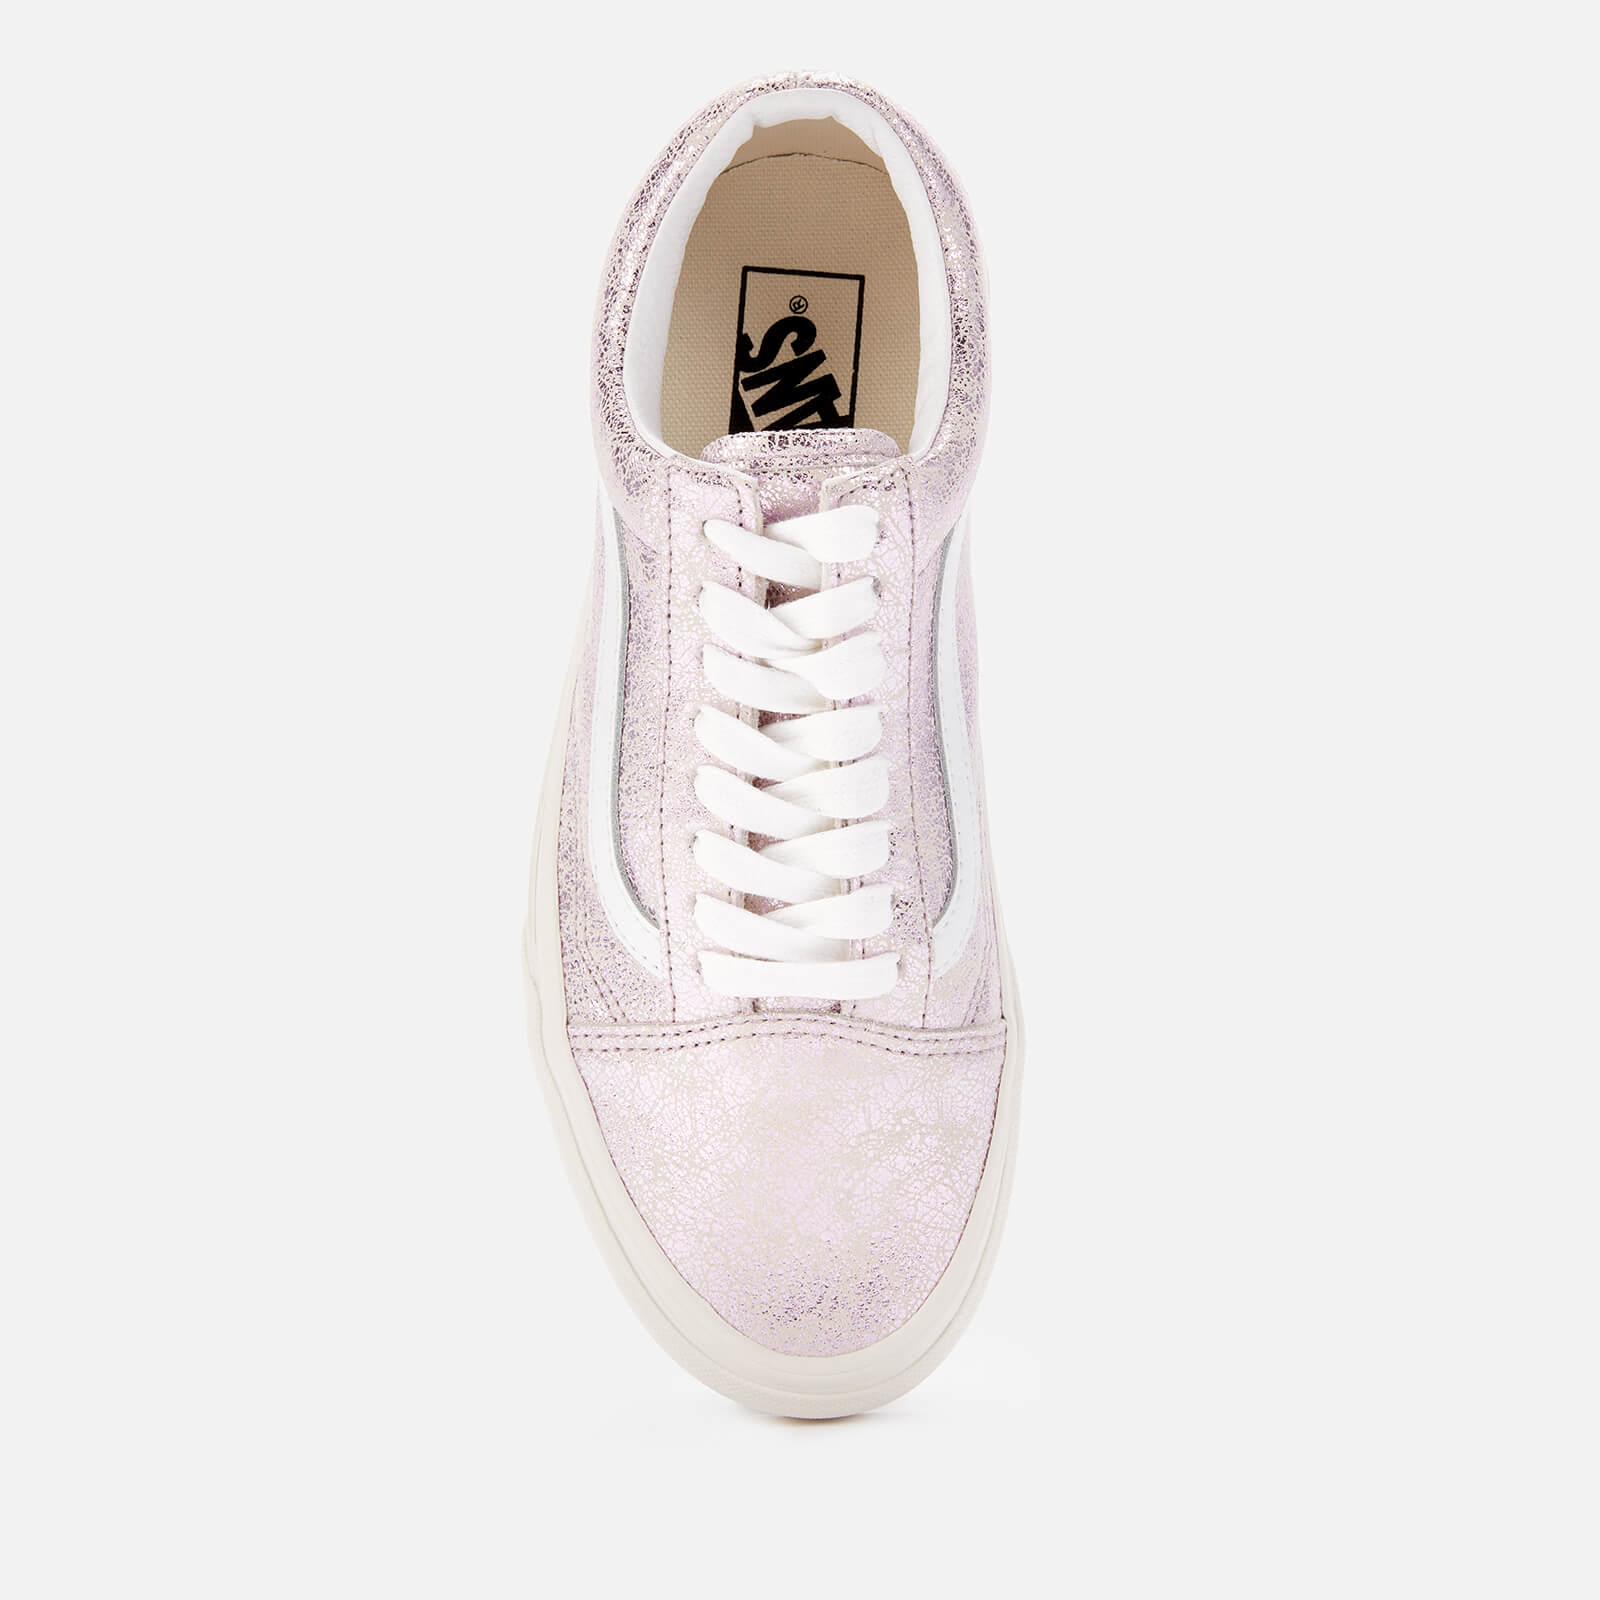 Vans Cracked Leather Old Skool Trainers in Pink | Lyst